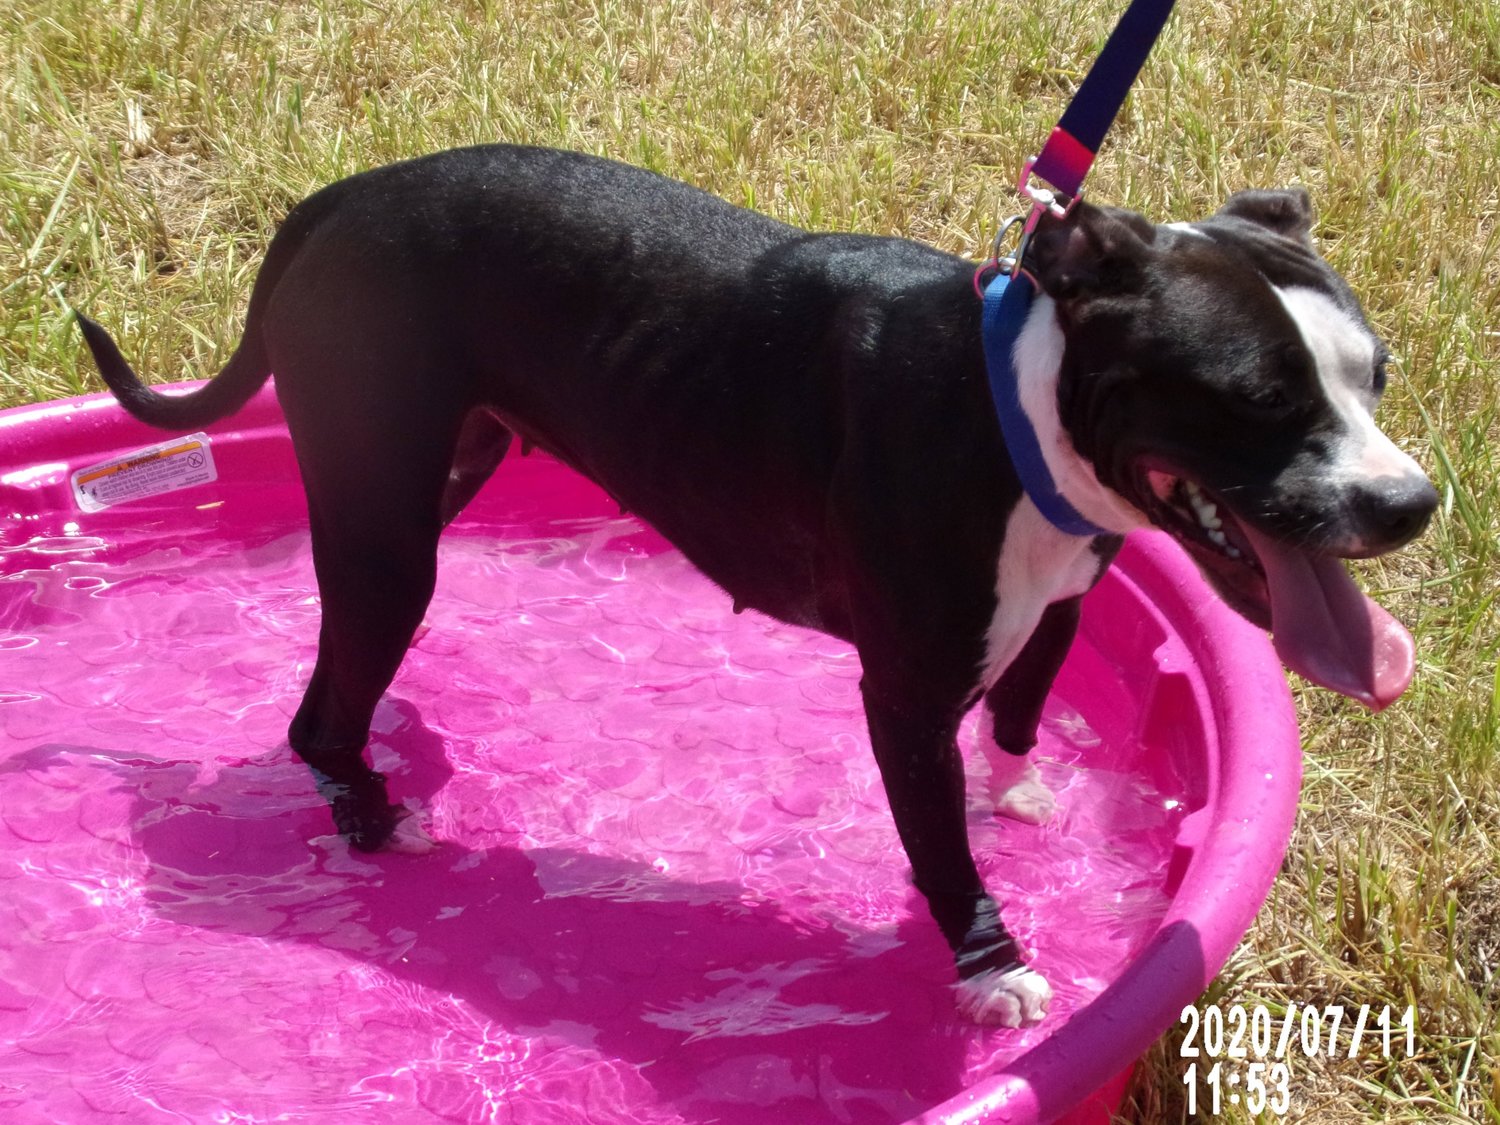 Zoey enjoys a dip in the pool.